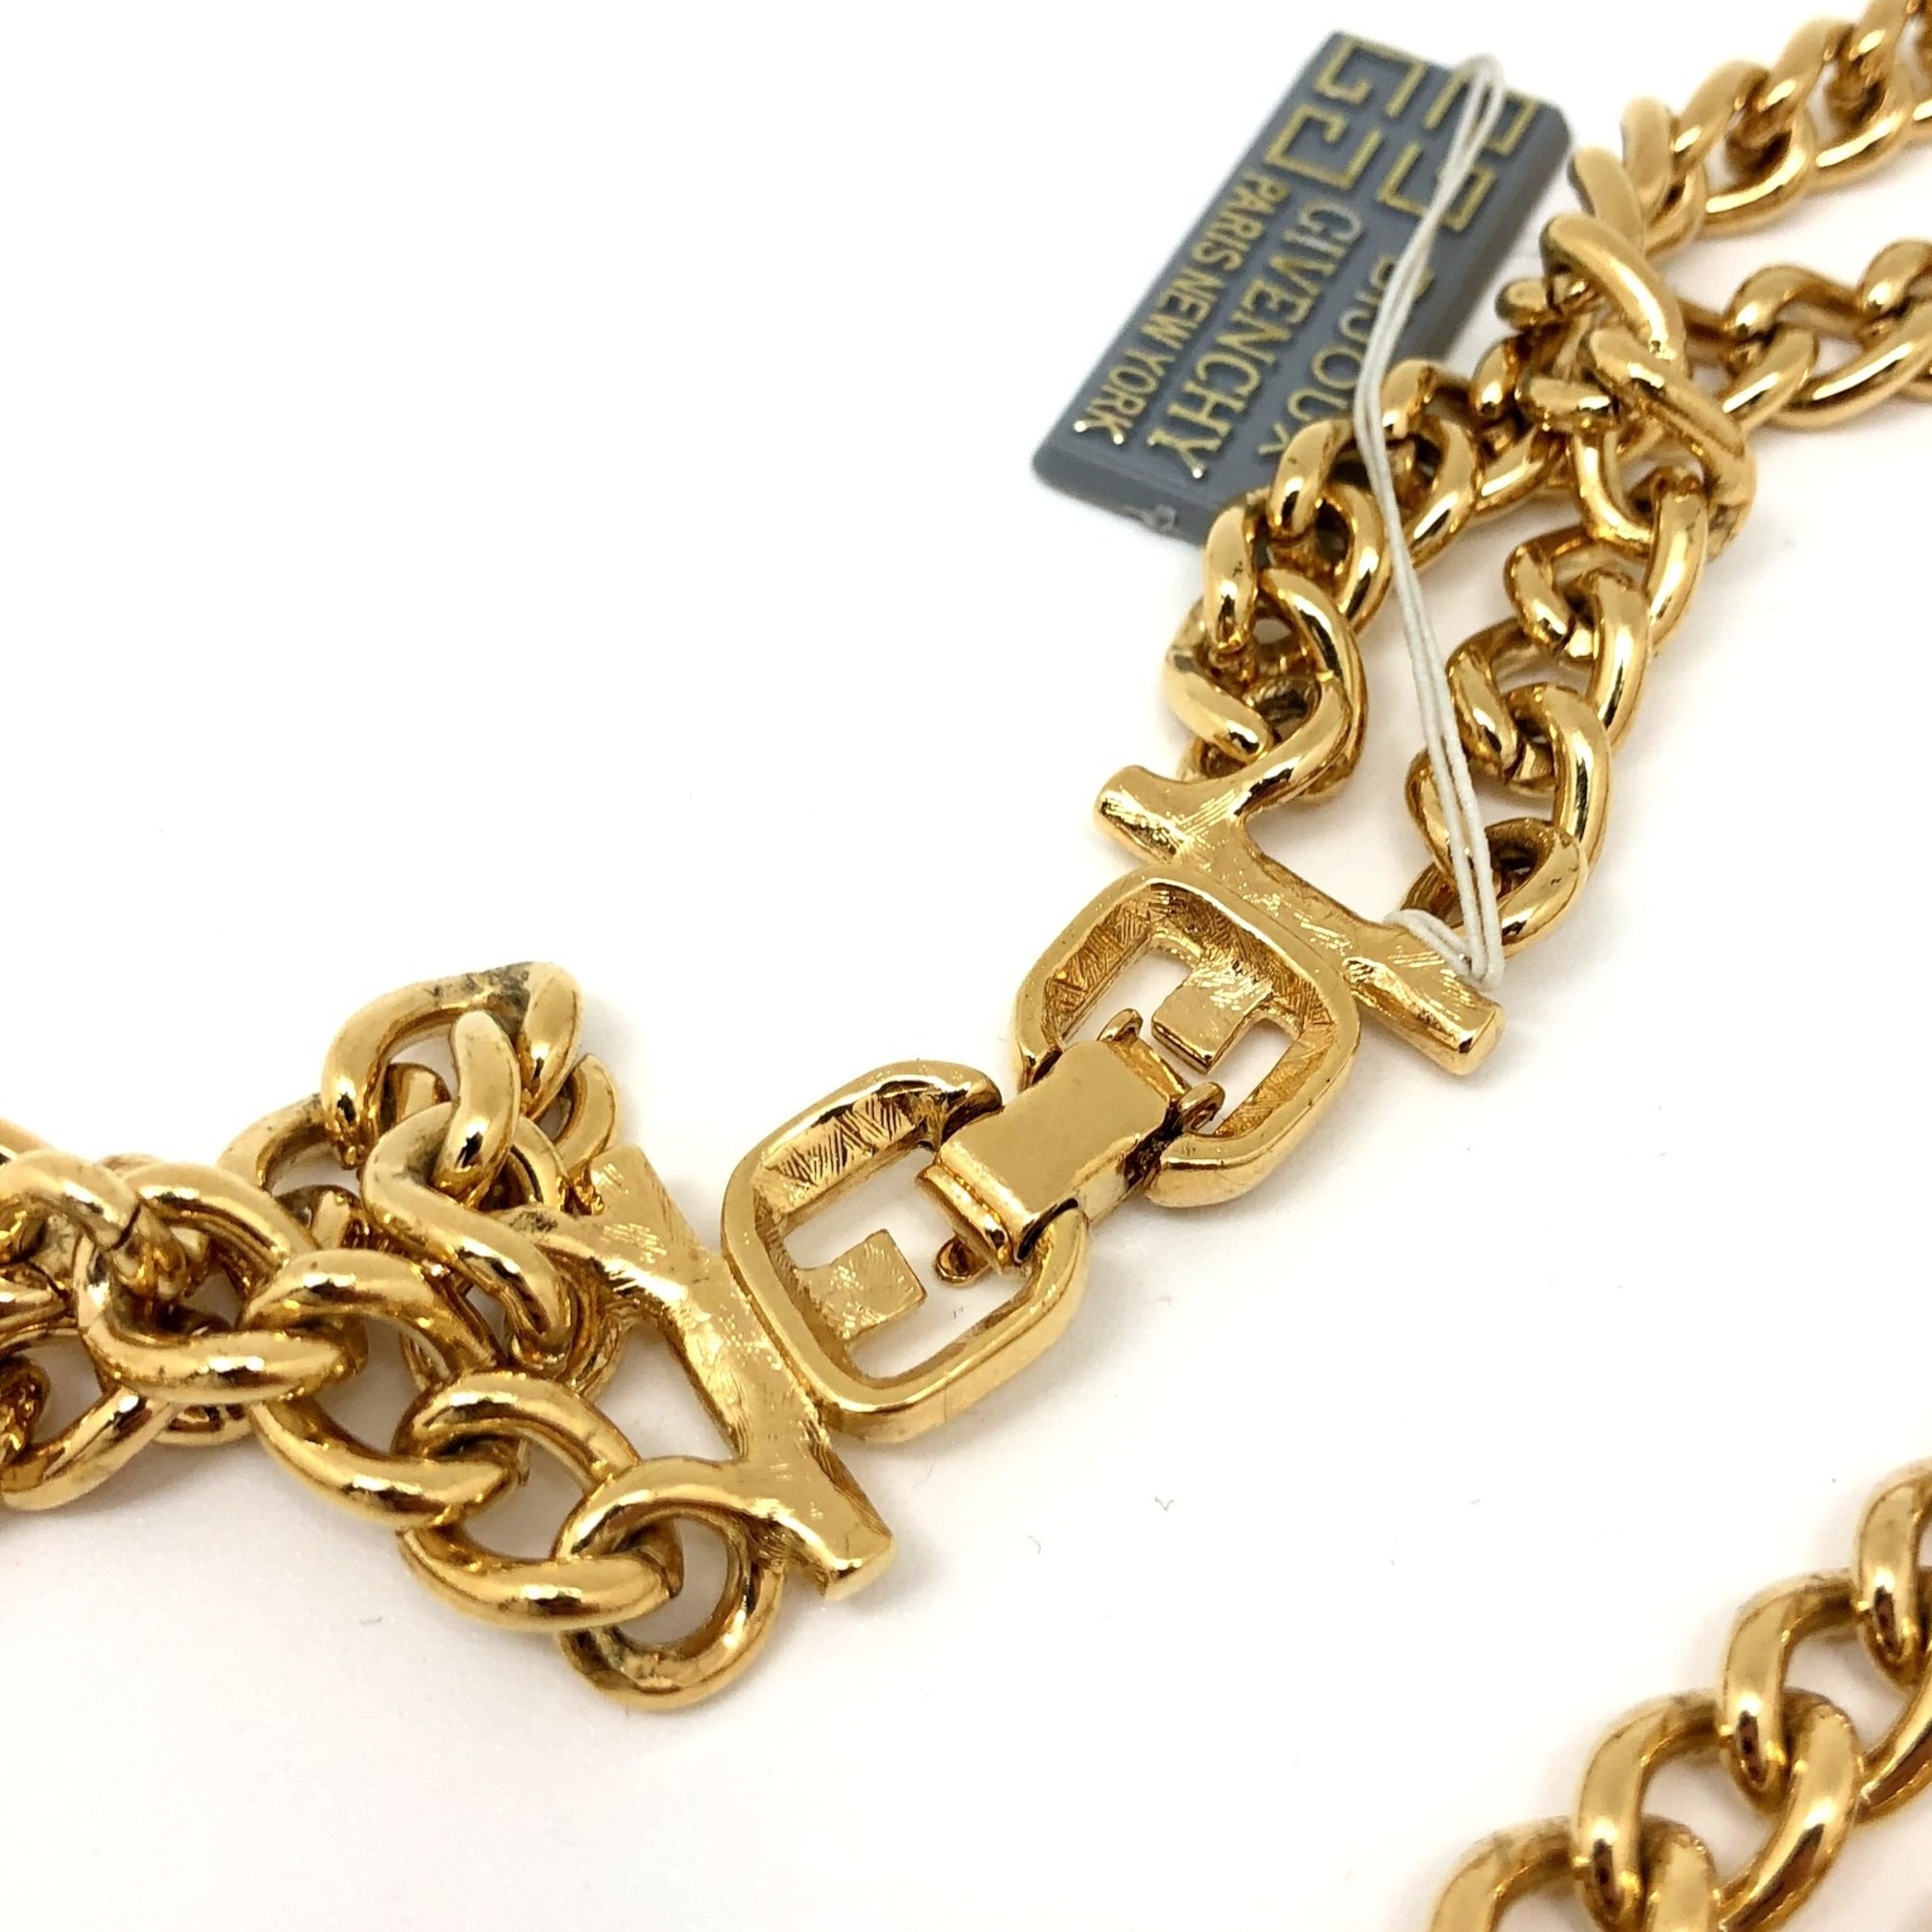 GIVENCHY Chain Belt Stone Gold Women's ITEJZ4DSNPL4 RM1081R